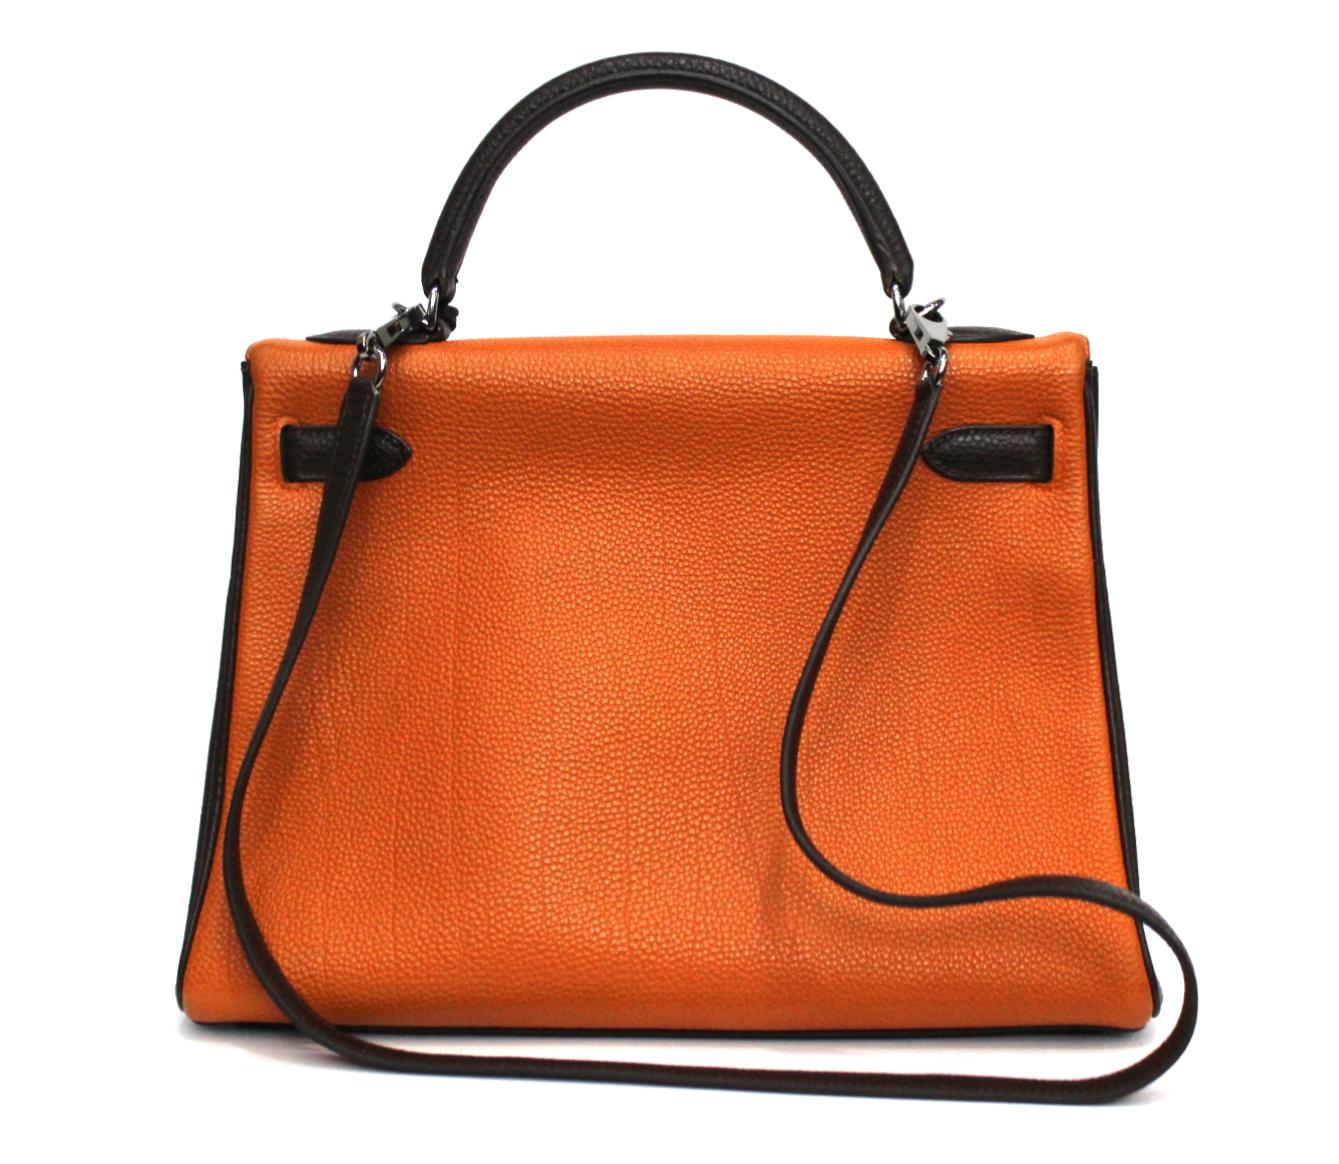 This fantastic Hermes Kelly Tricolor Togo in size 32 is constructed with scratch-resistant Togo leather in striking blood orange front, tangerine back, and chocolate brown sides and trimming. Accented with polished Palladium hardware and silver